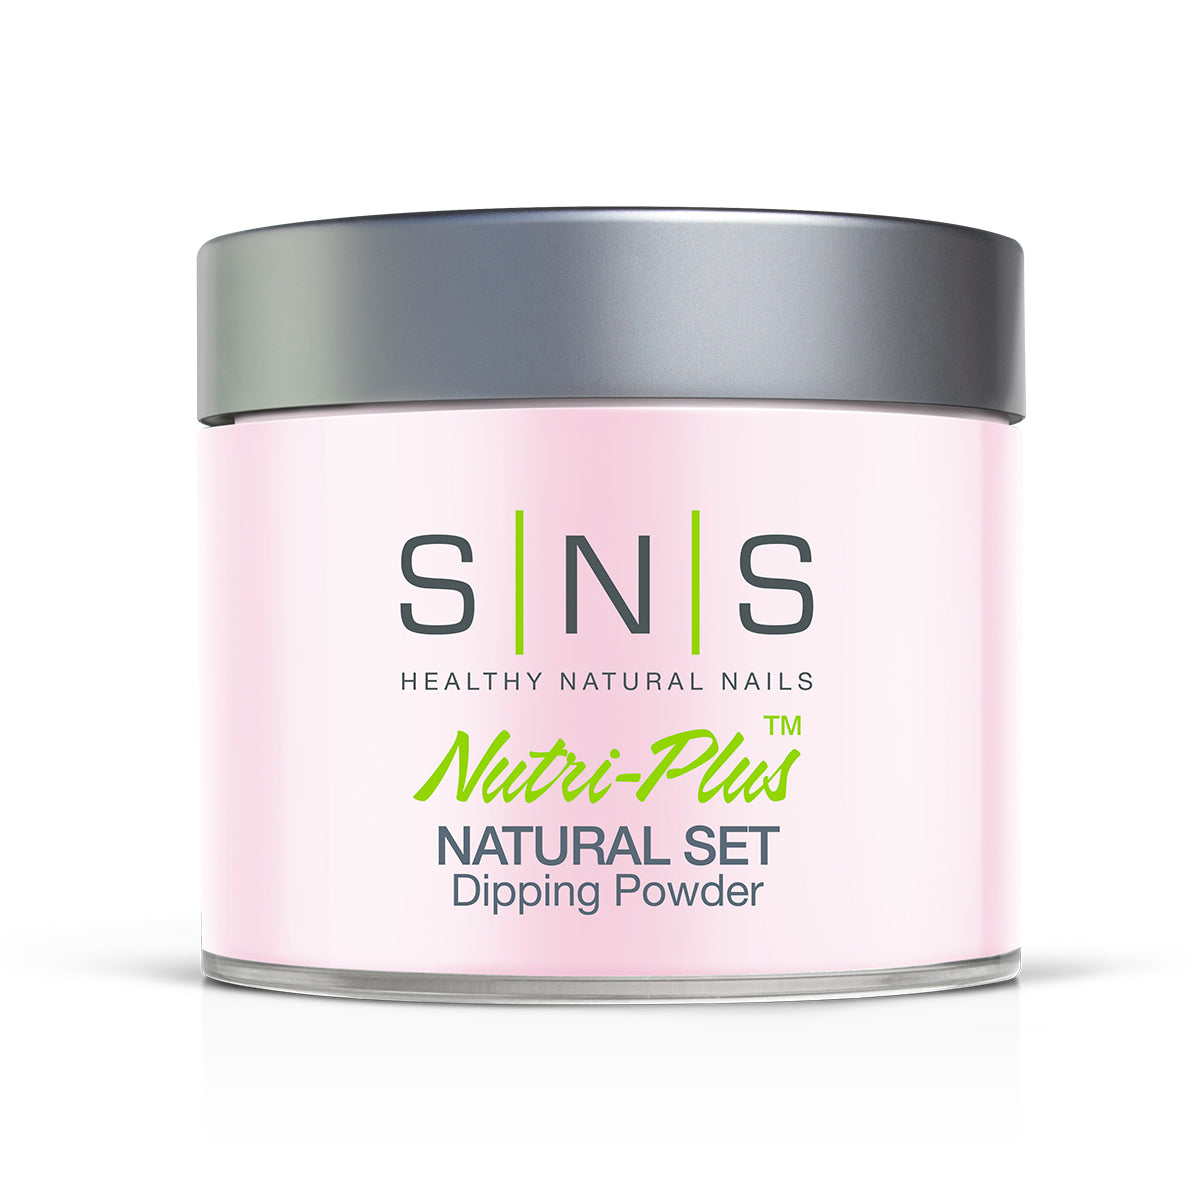 SNS Nutri-Plus French Dipping Powder Natural Set 113g packaging